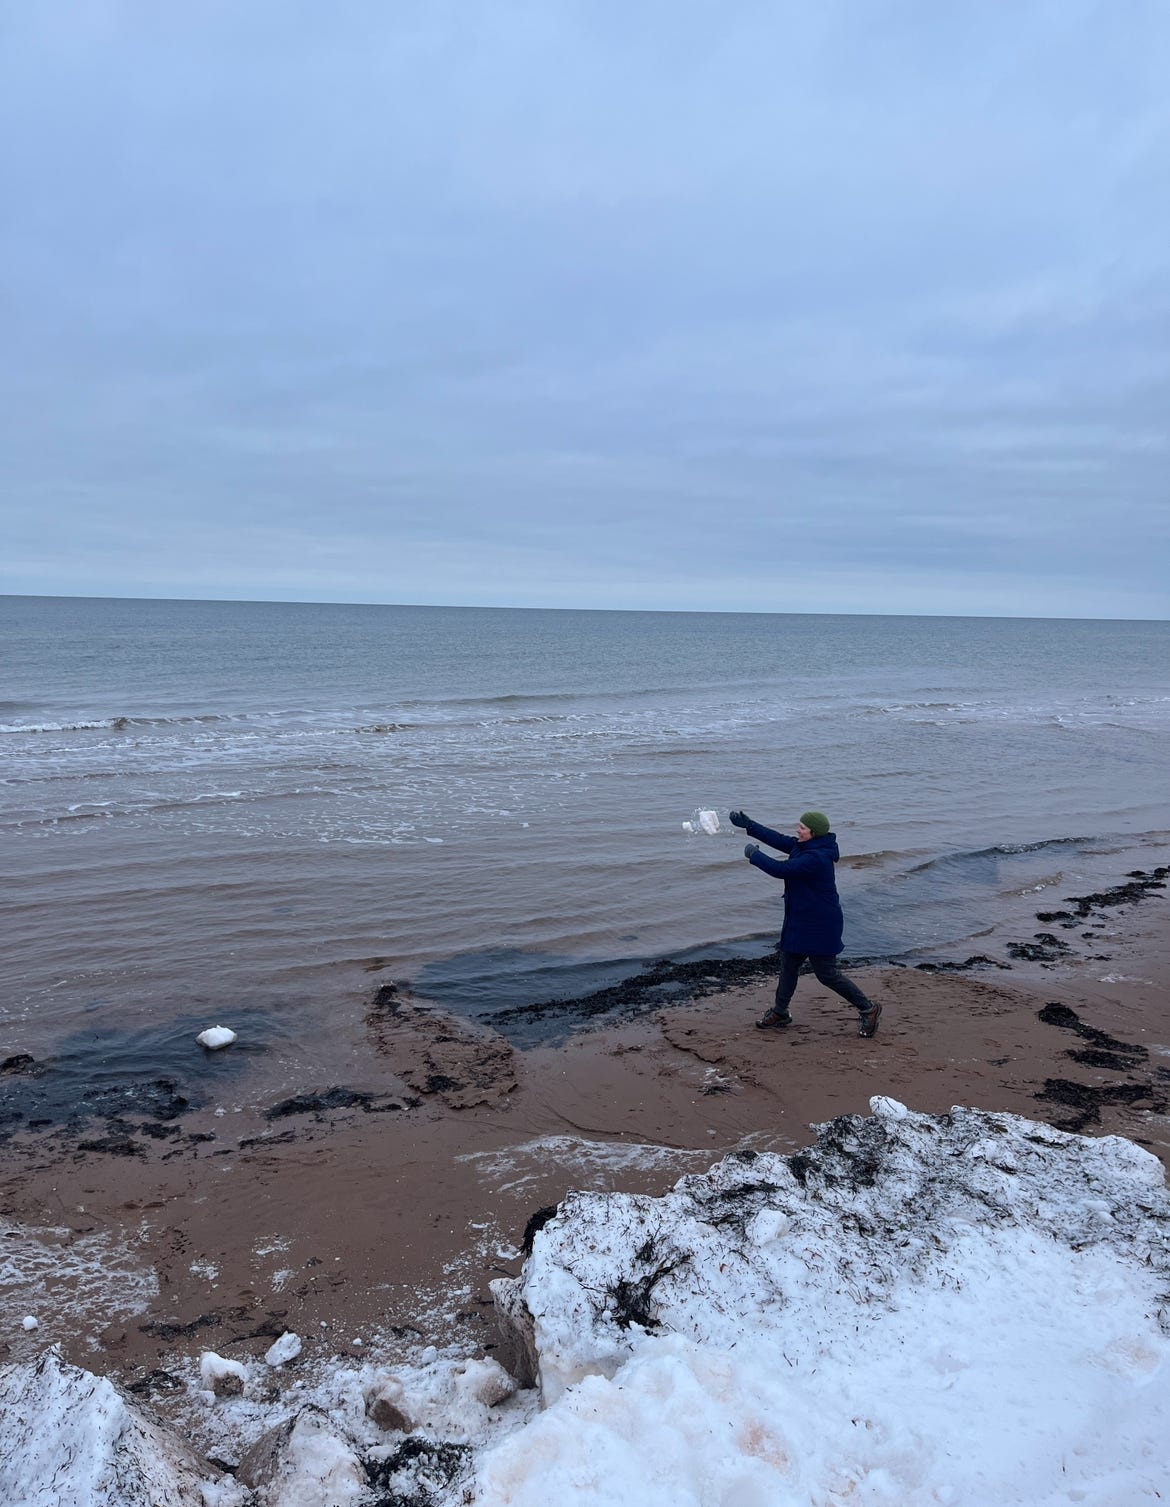 My wife, in hear winter coat and woolens, throws a big chunk of snow into the cold grey waters of Brackley Beach.